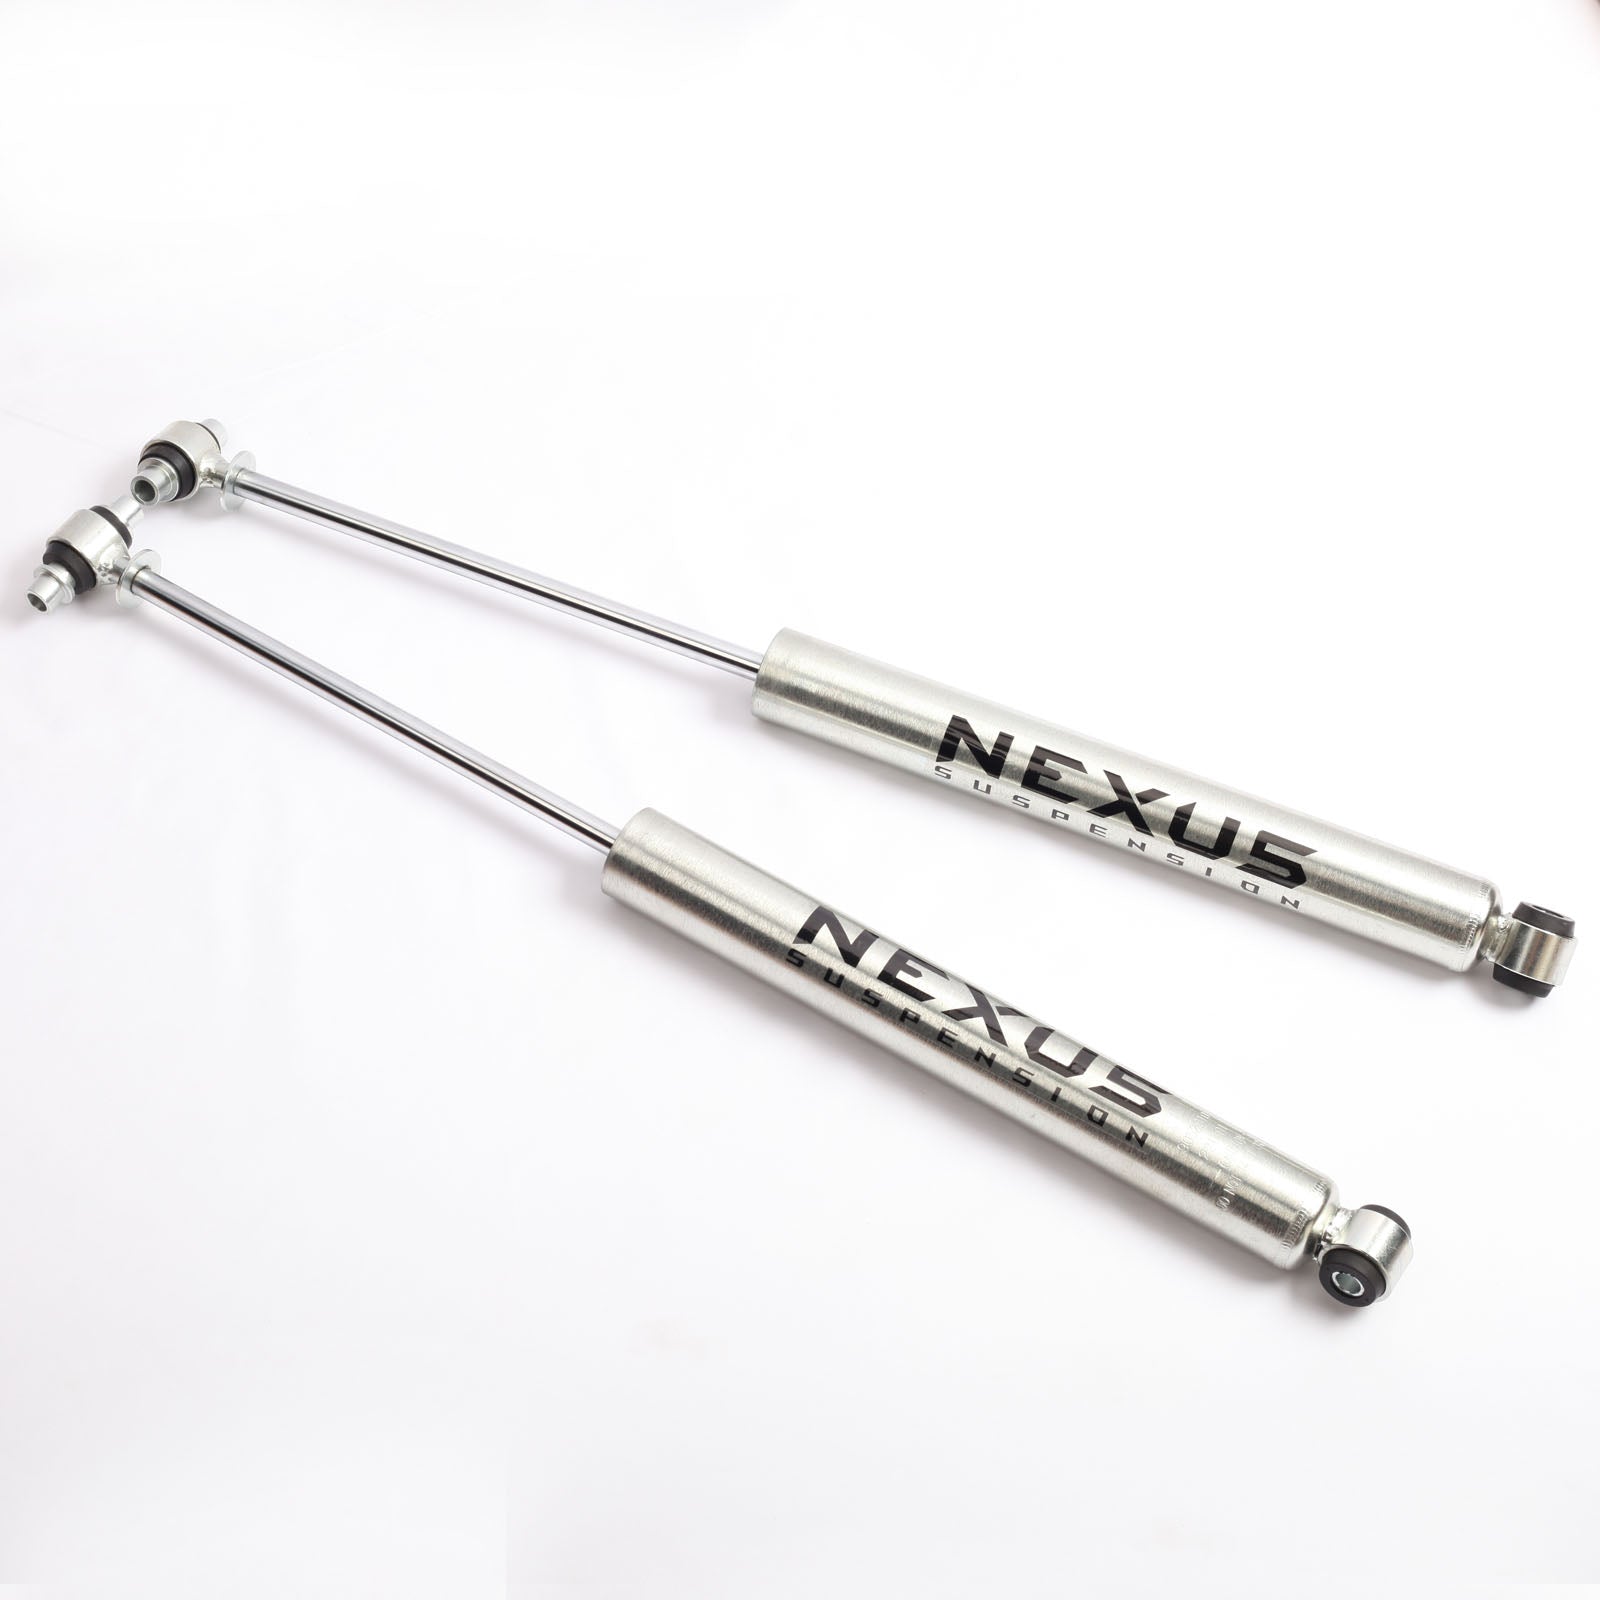 NEXUS SUSPENSION 4 Inch Lift Rear Shock Absorber for 1999-2006 Chevy Silverado 1500 GMC Sierra 1500 2wd,Zinc Plated Coating,Pair Pack